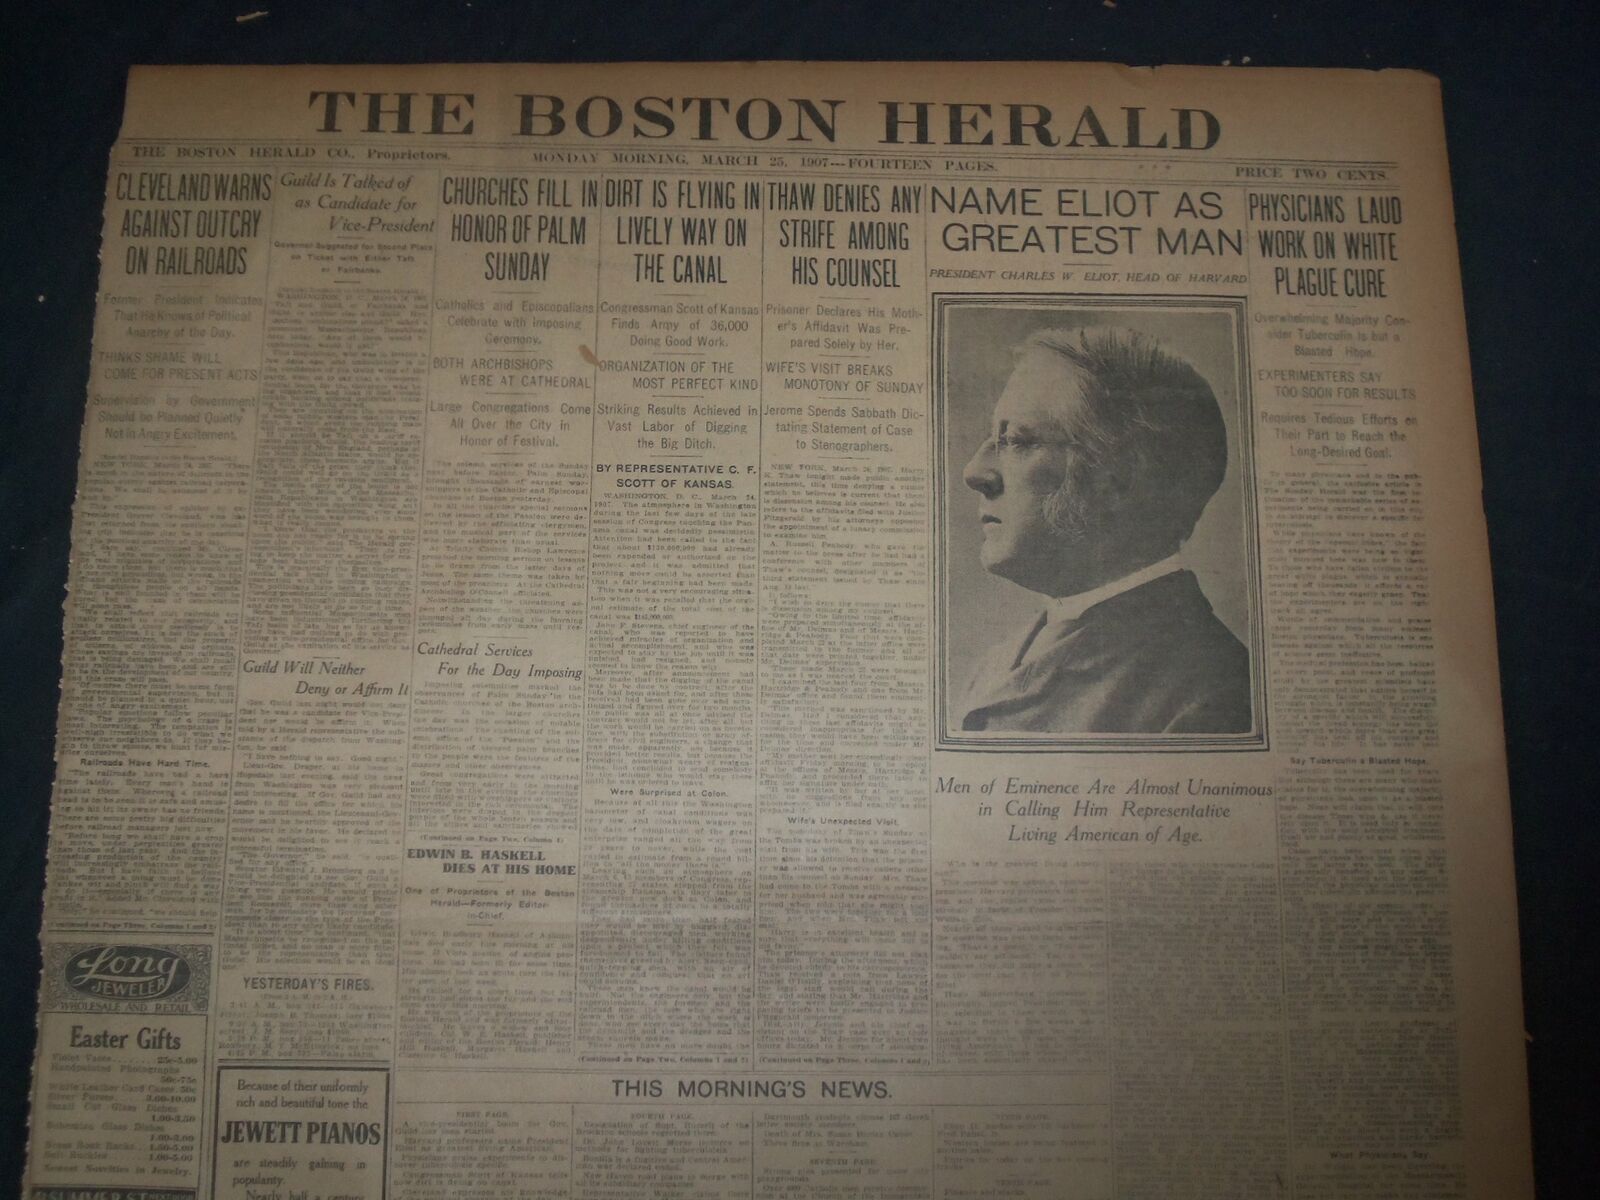 1907 MARCH 25 THE BOSTON HERALD - NAME ELIOT AS GREATEST MAN - BH 16